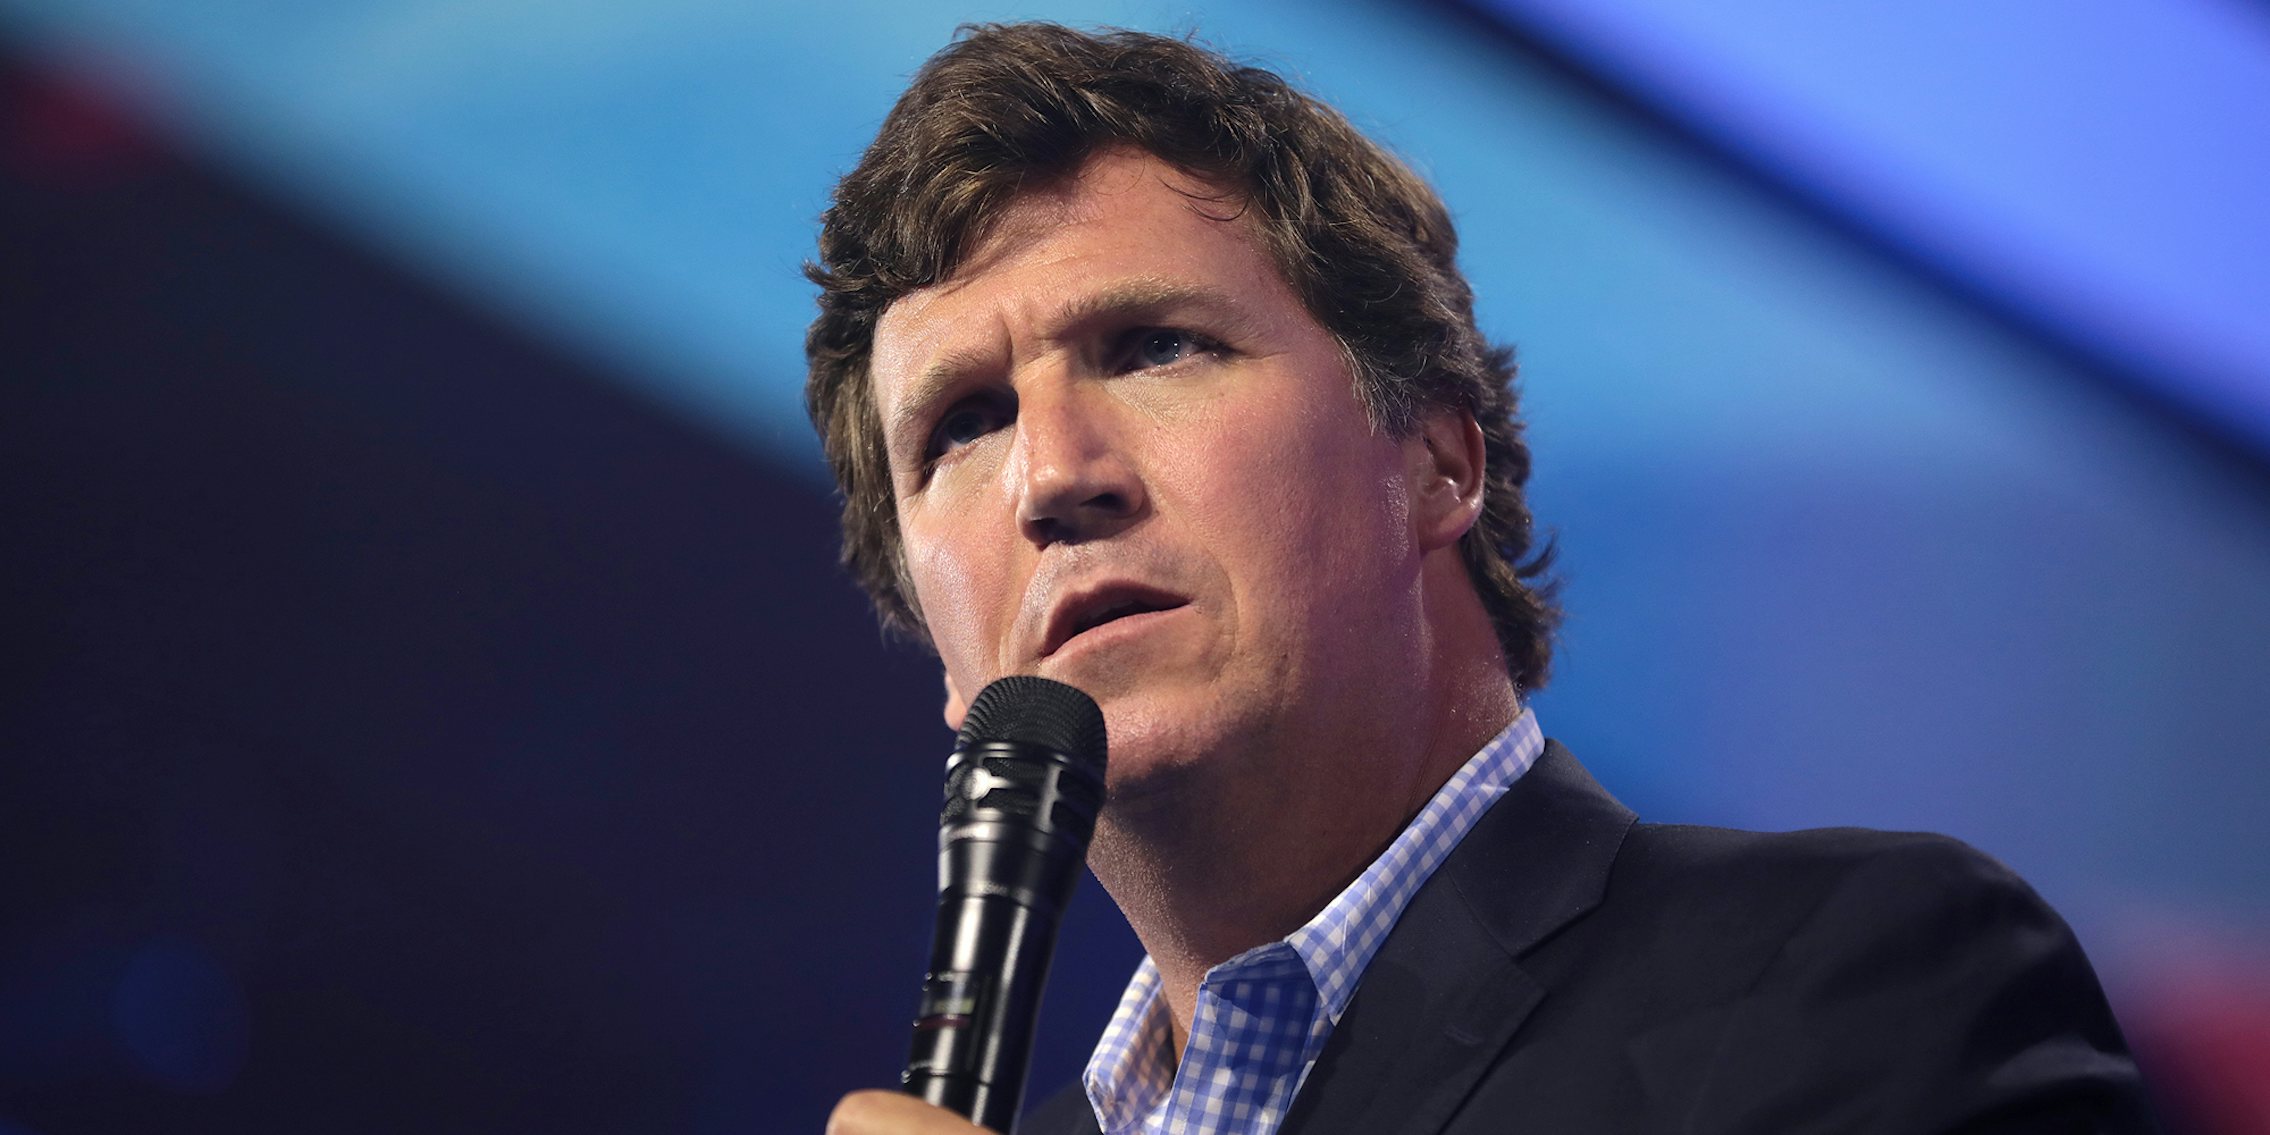 Tucker Carlson speaking into microphone in front of blue background